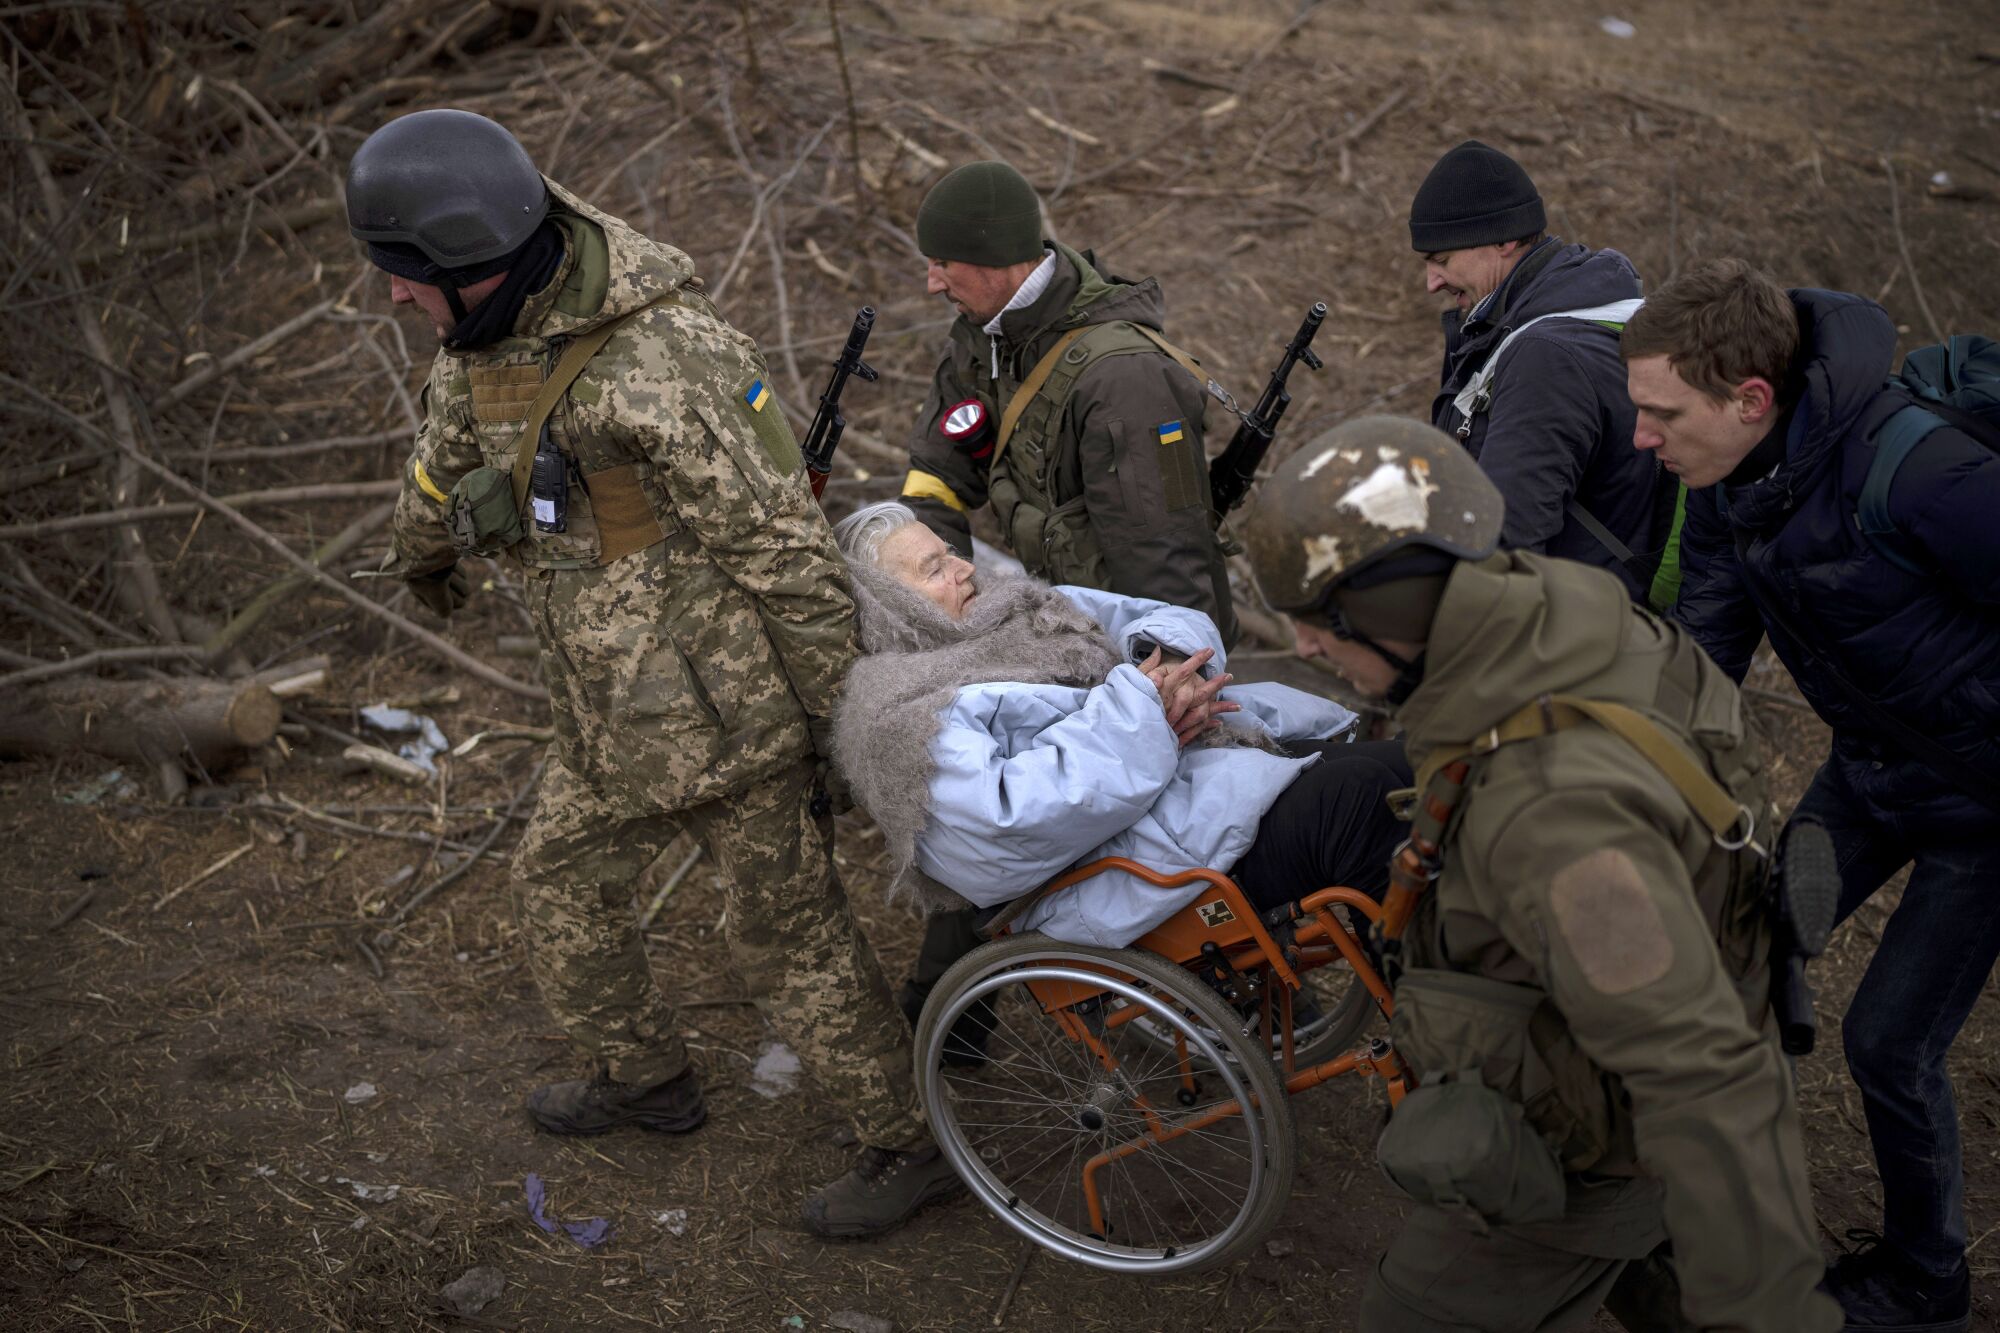 Ukrainian soldiers and militiamen carry a woman in a wheelchair while people flee Irpin on the outskirts of Kyiv, Ukraine.